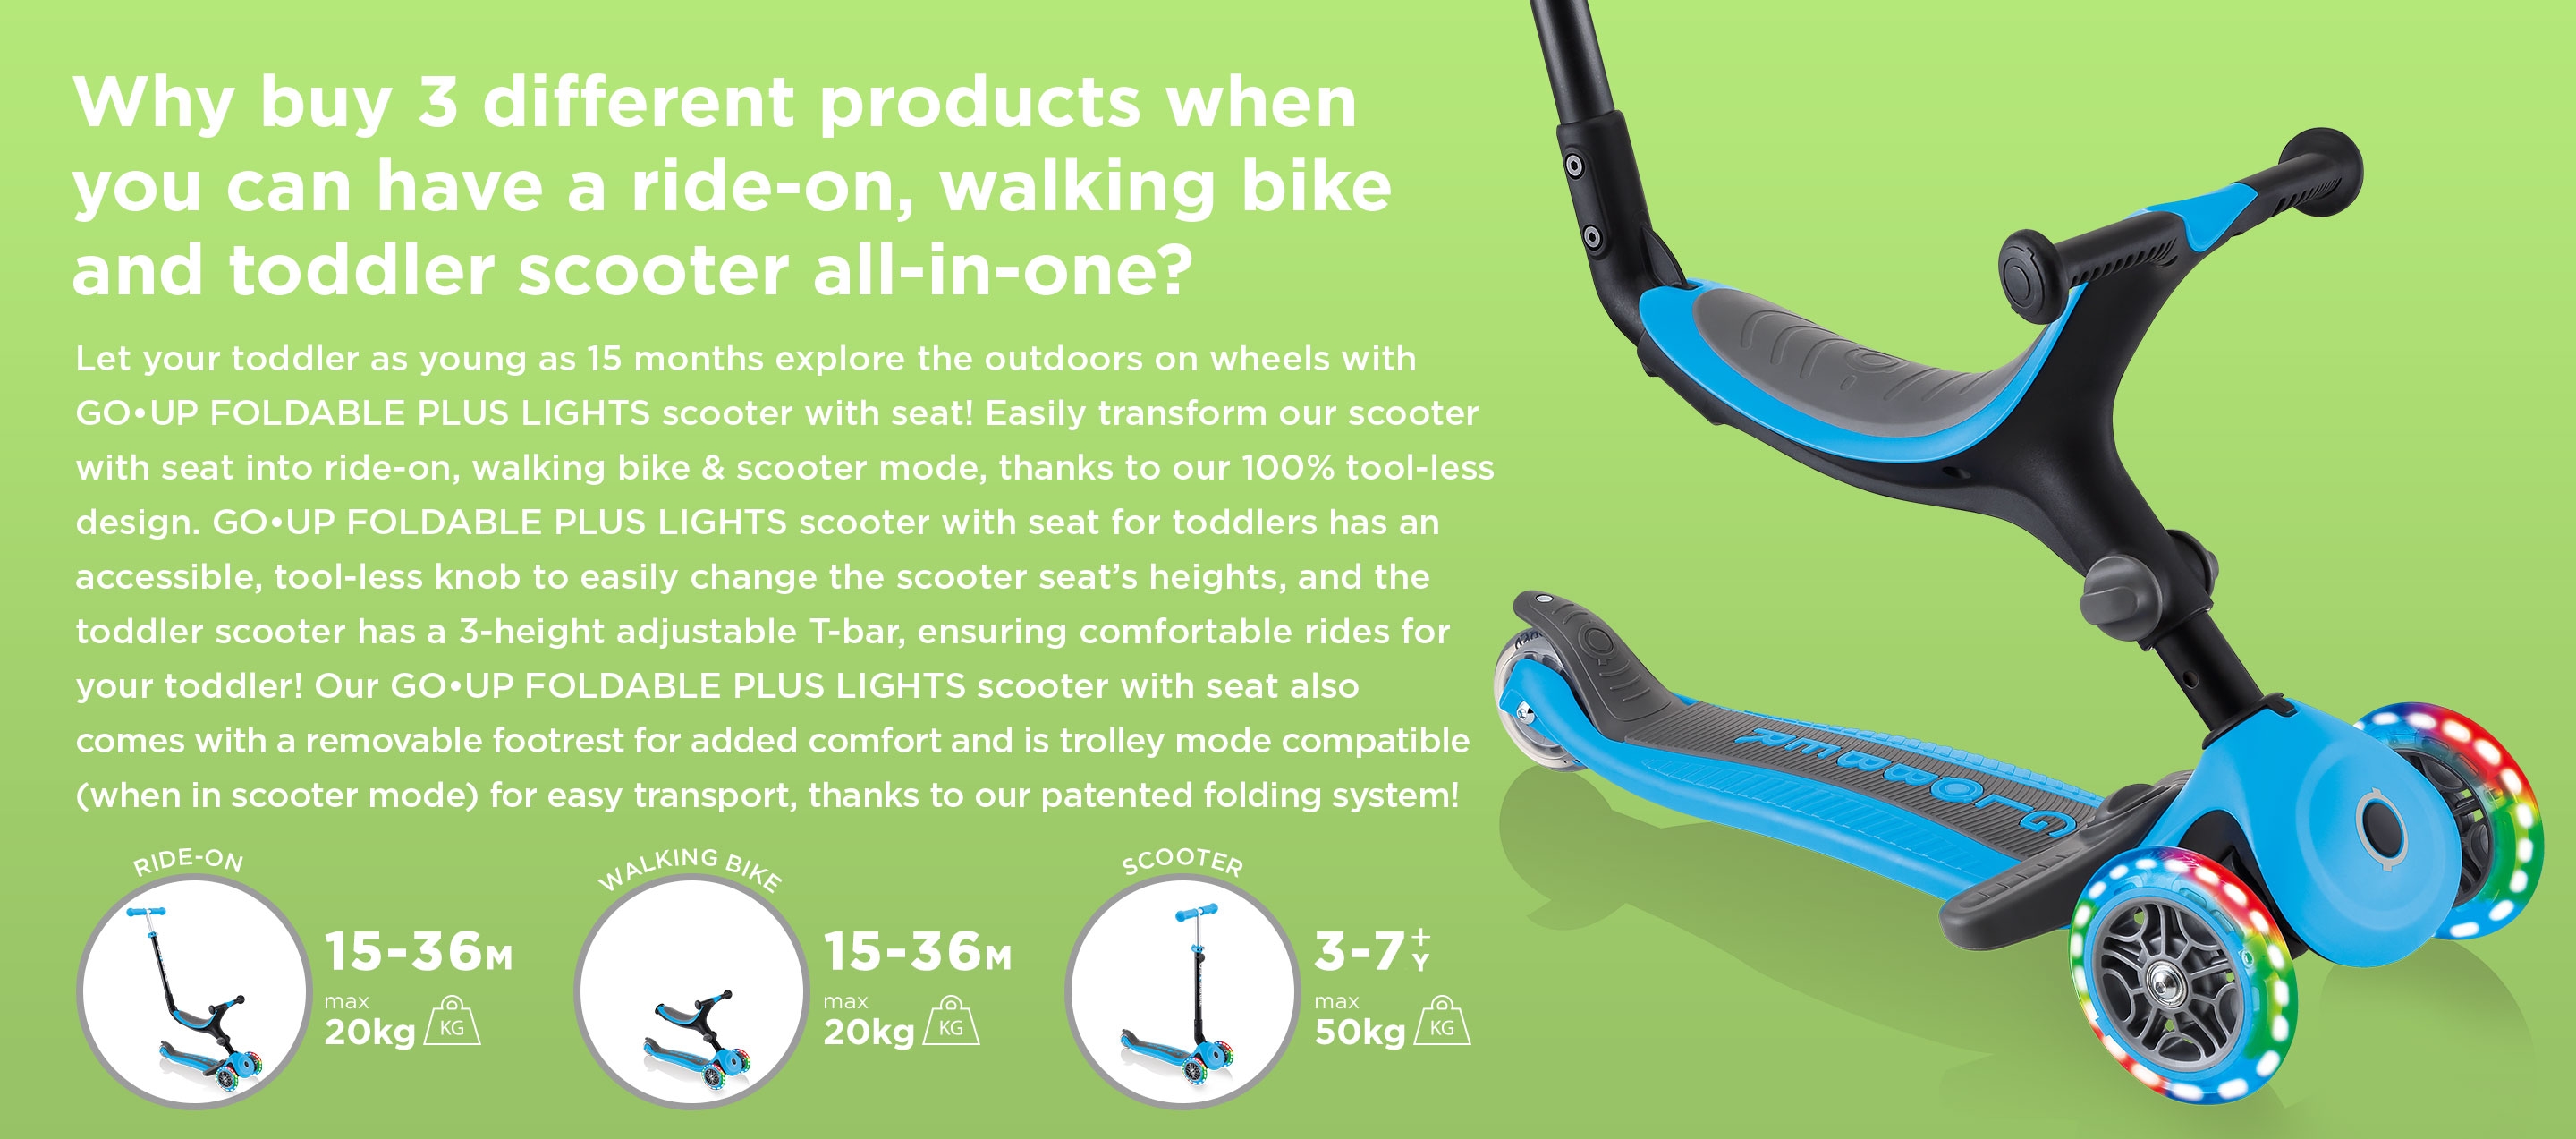 GO UP FOLDABLE PLUS LIGHTS is a 3 in 1 light up scooter with seat for toddlers